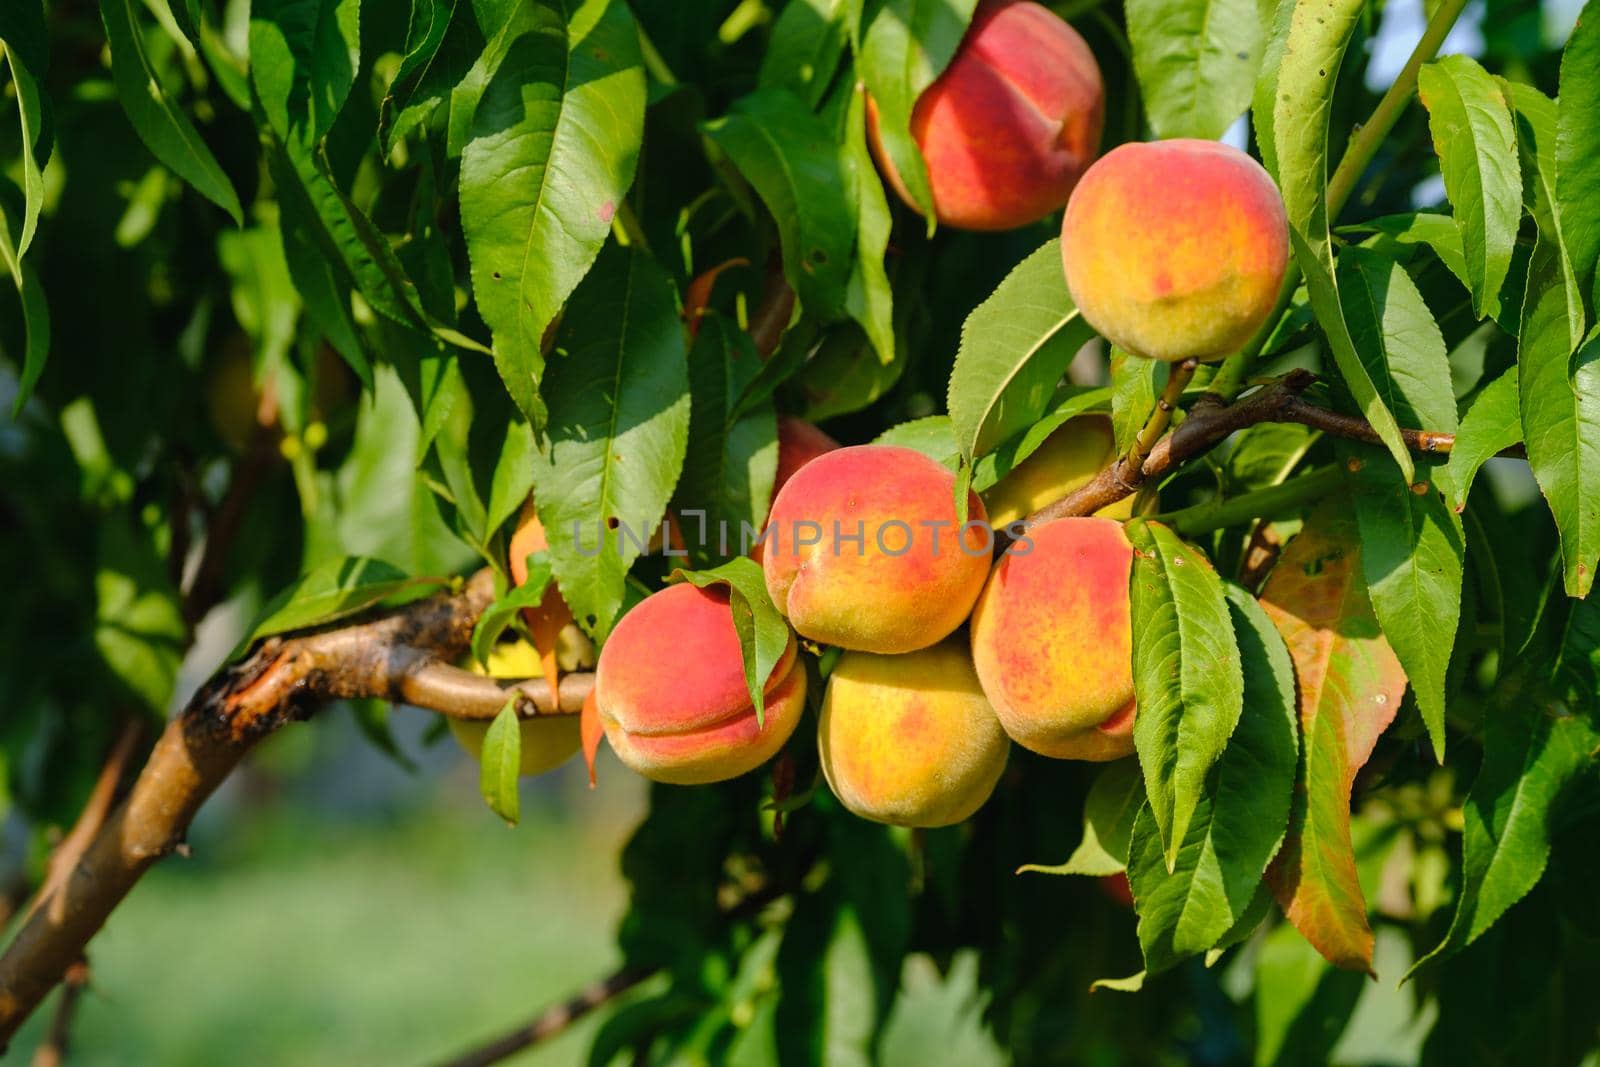 Peaches growing on a tree. Fresh peach tree. Ripe peach close-up with peach orchard in the background.